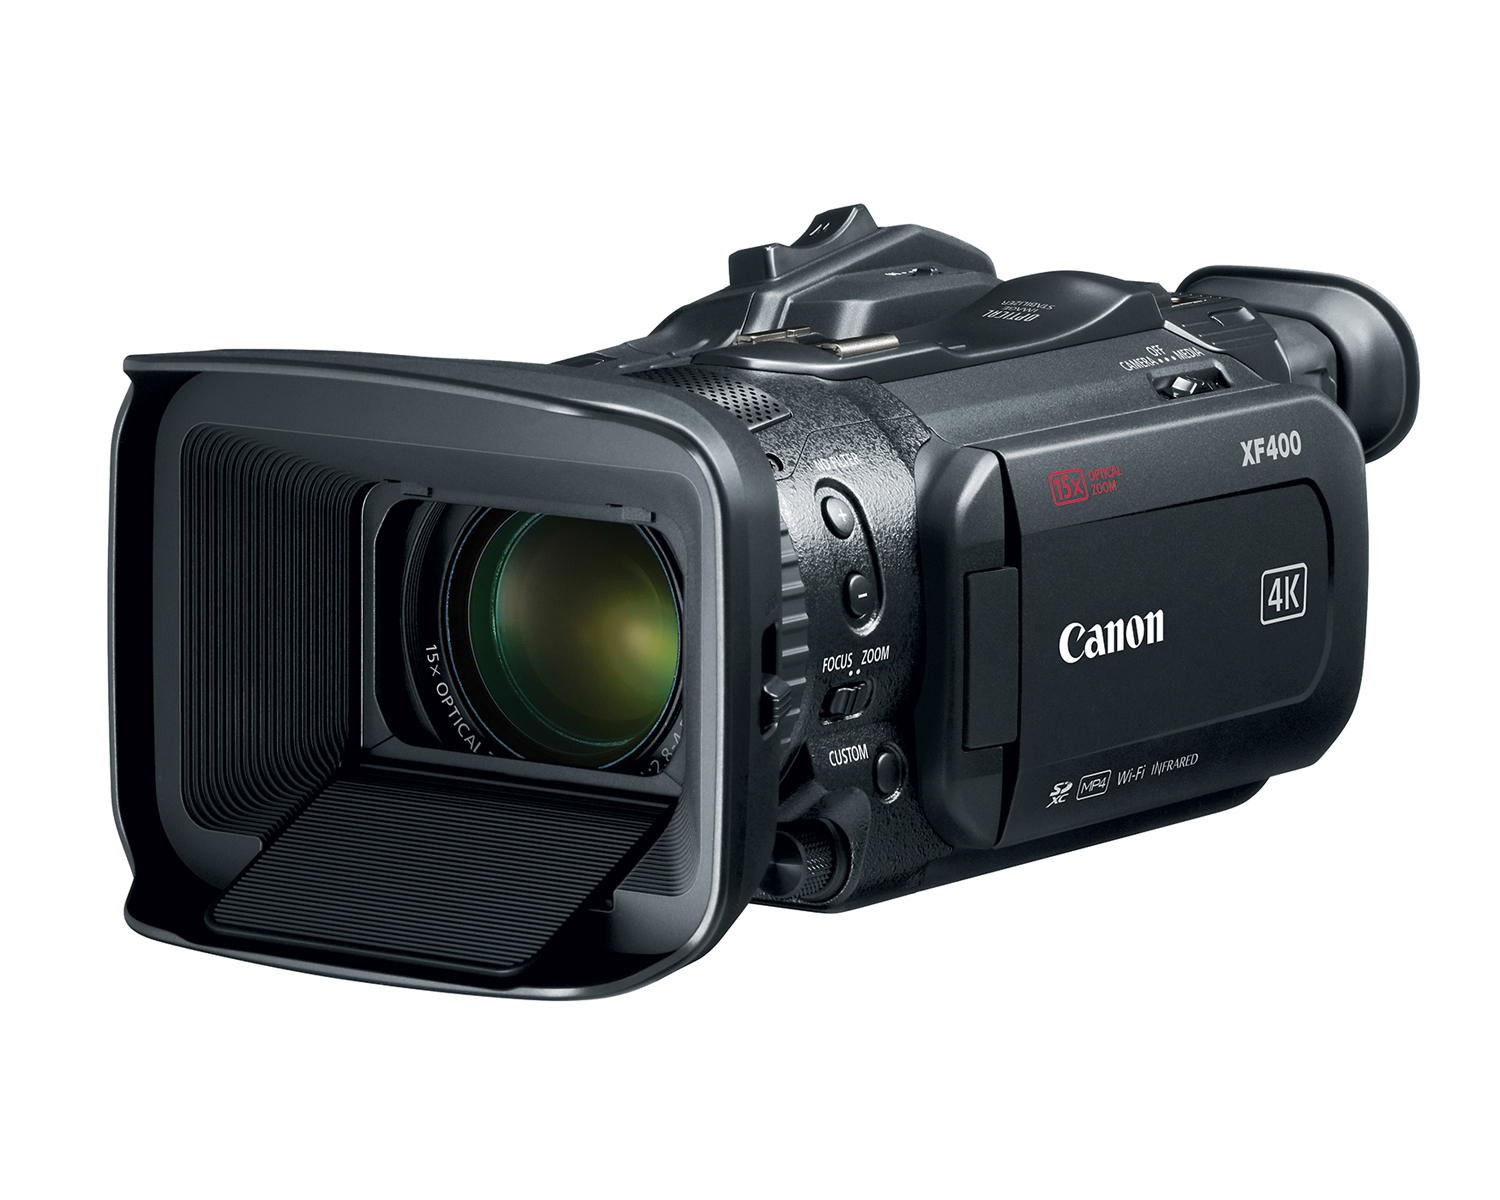 Here are Canon's new 4K video camcorders, officially announced